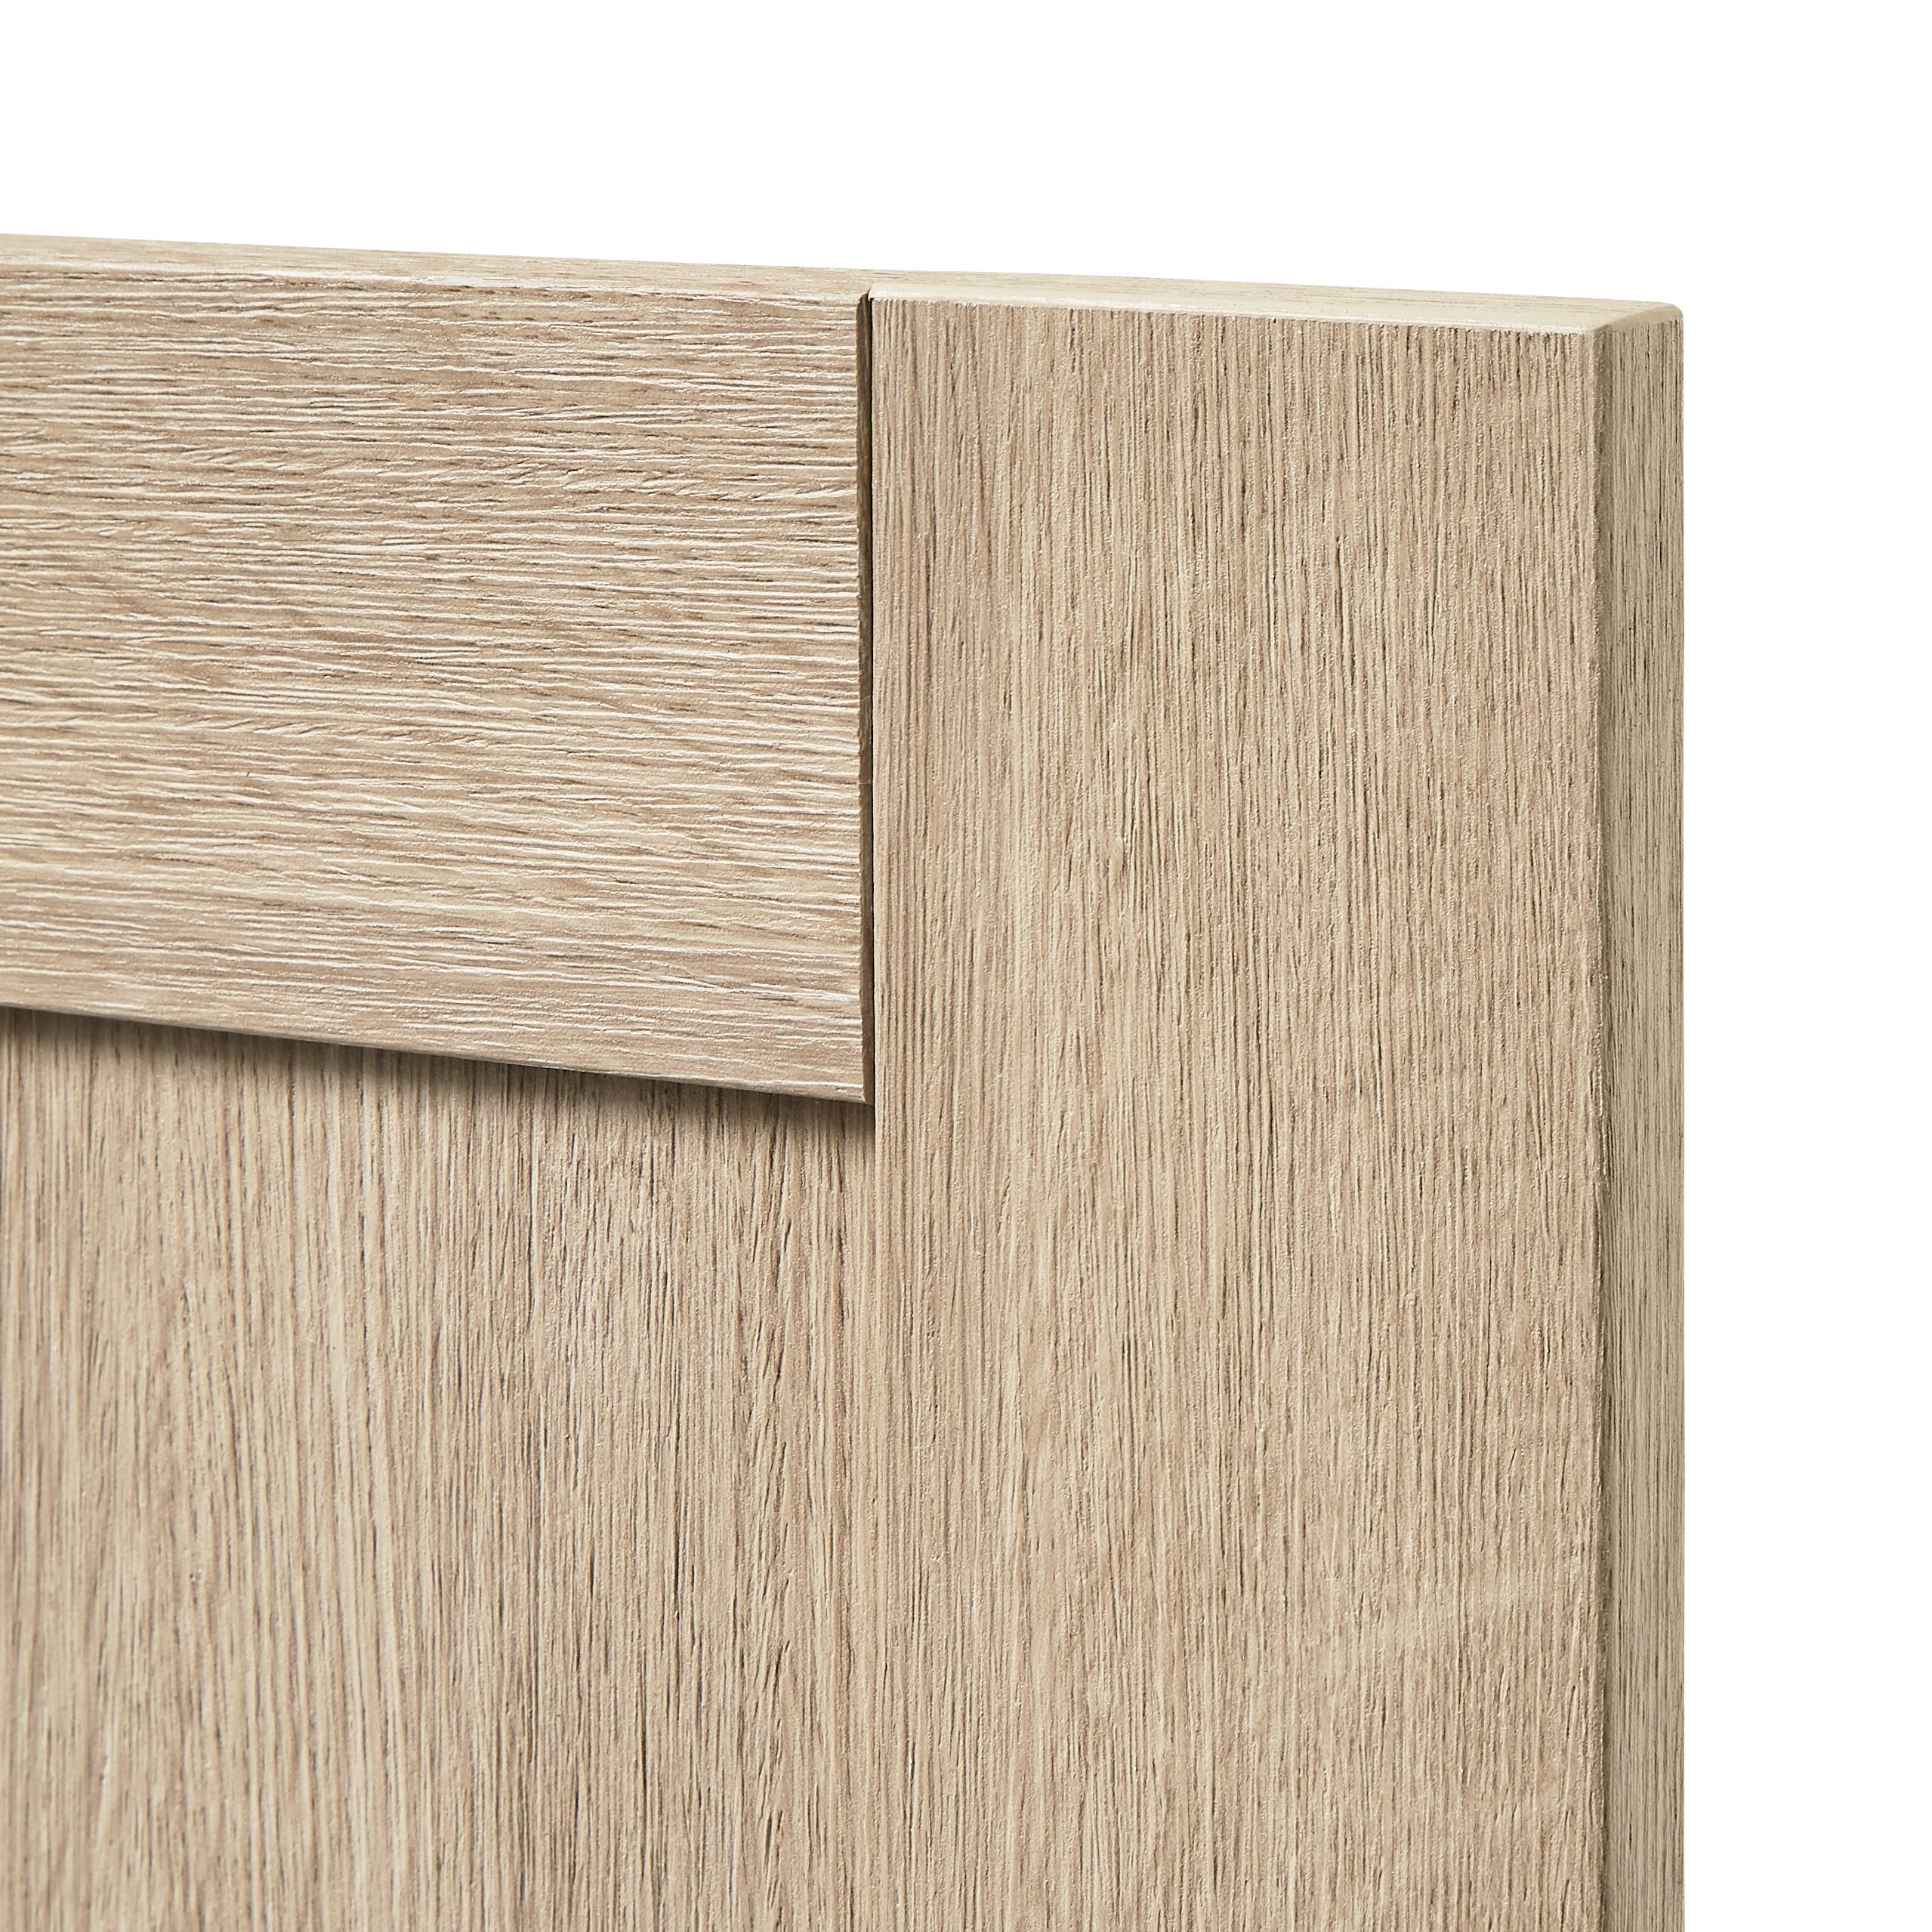 GoodHome Alpinia Oak effect shaker Drawer front (W)500mm, Pack of 3